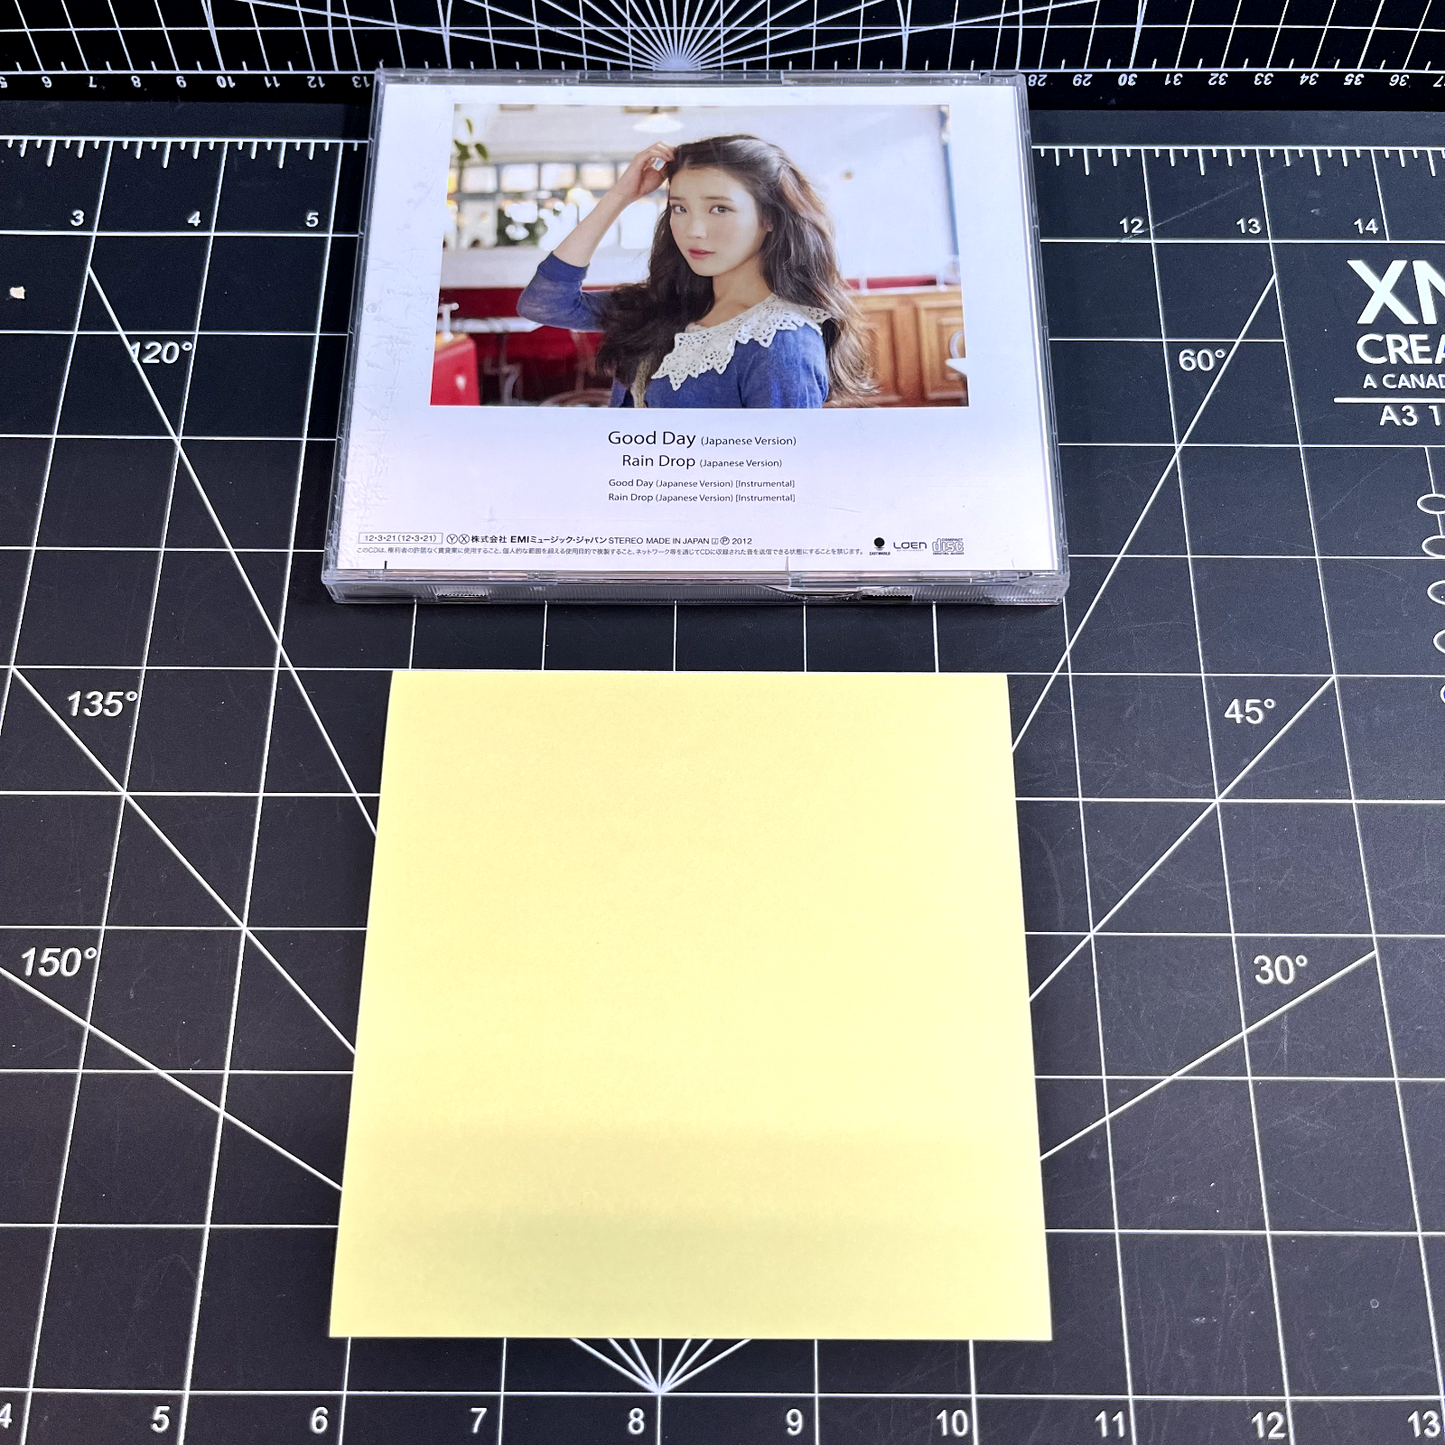 IU The 1st Japan Single CD Album Good Day - Sticker Included